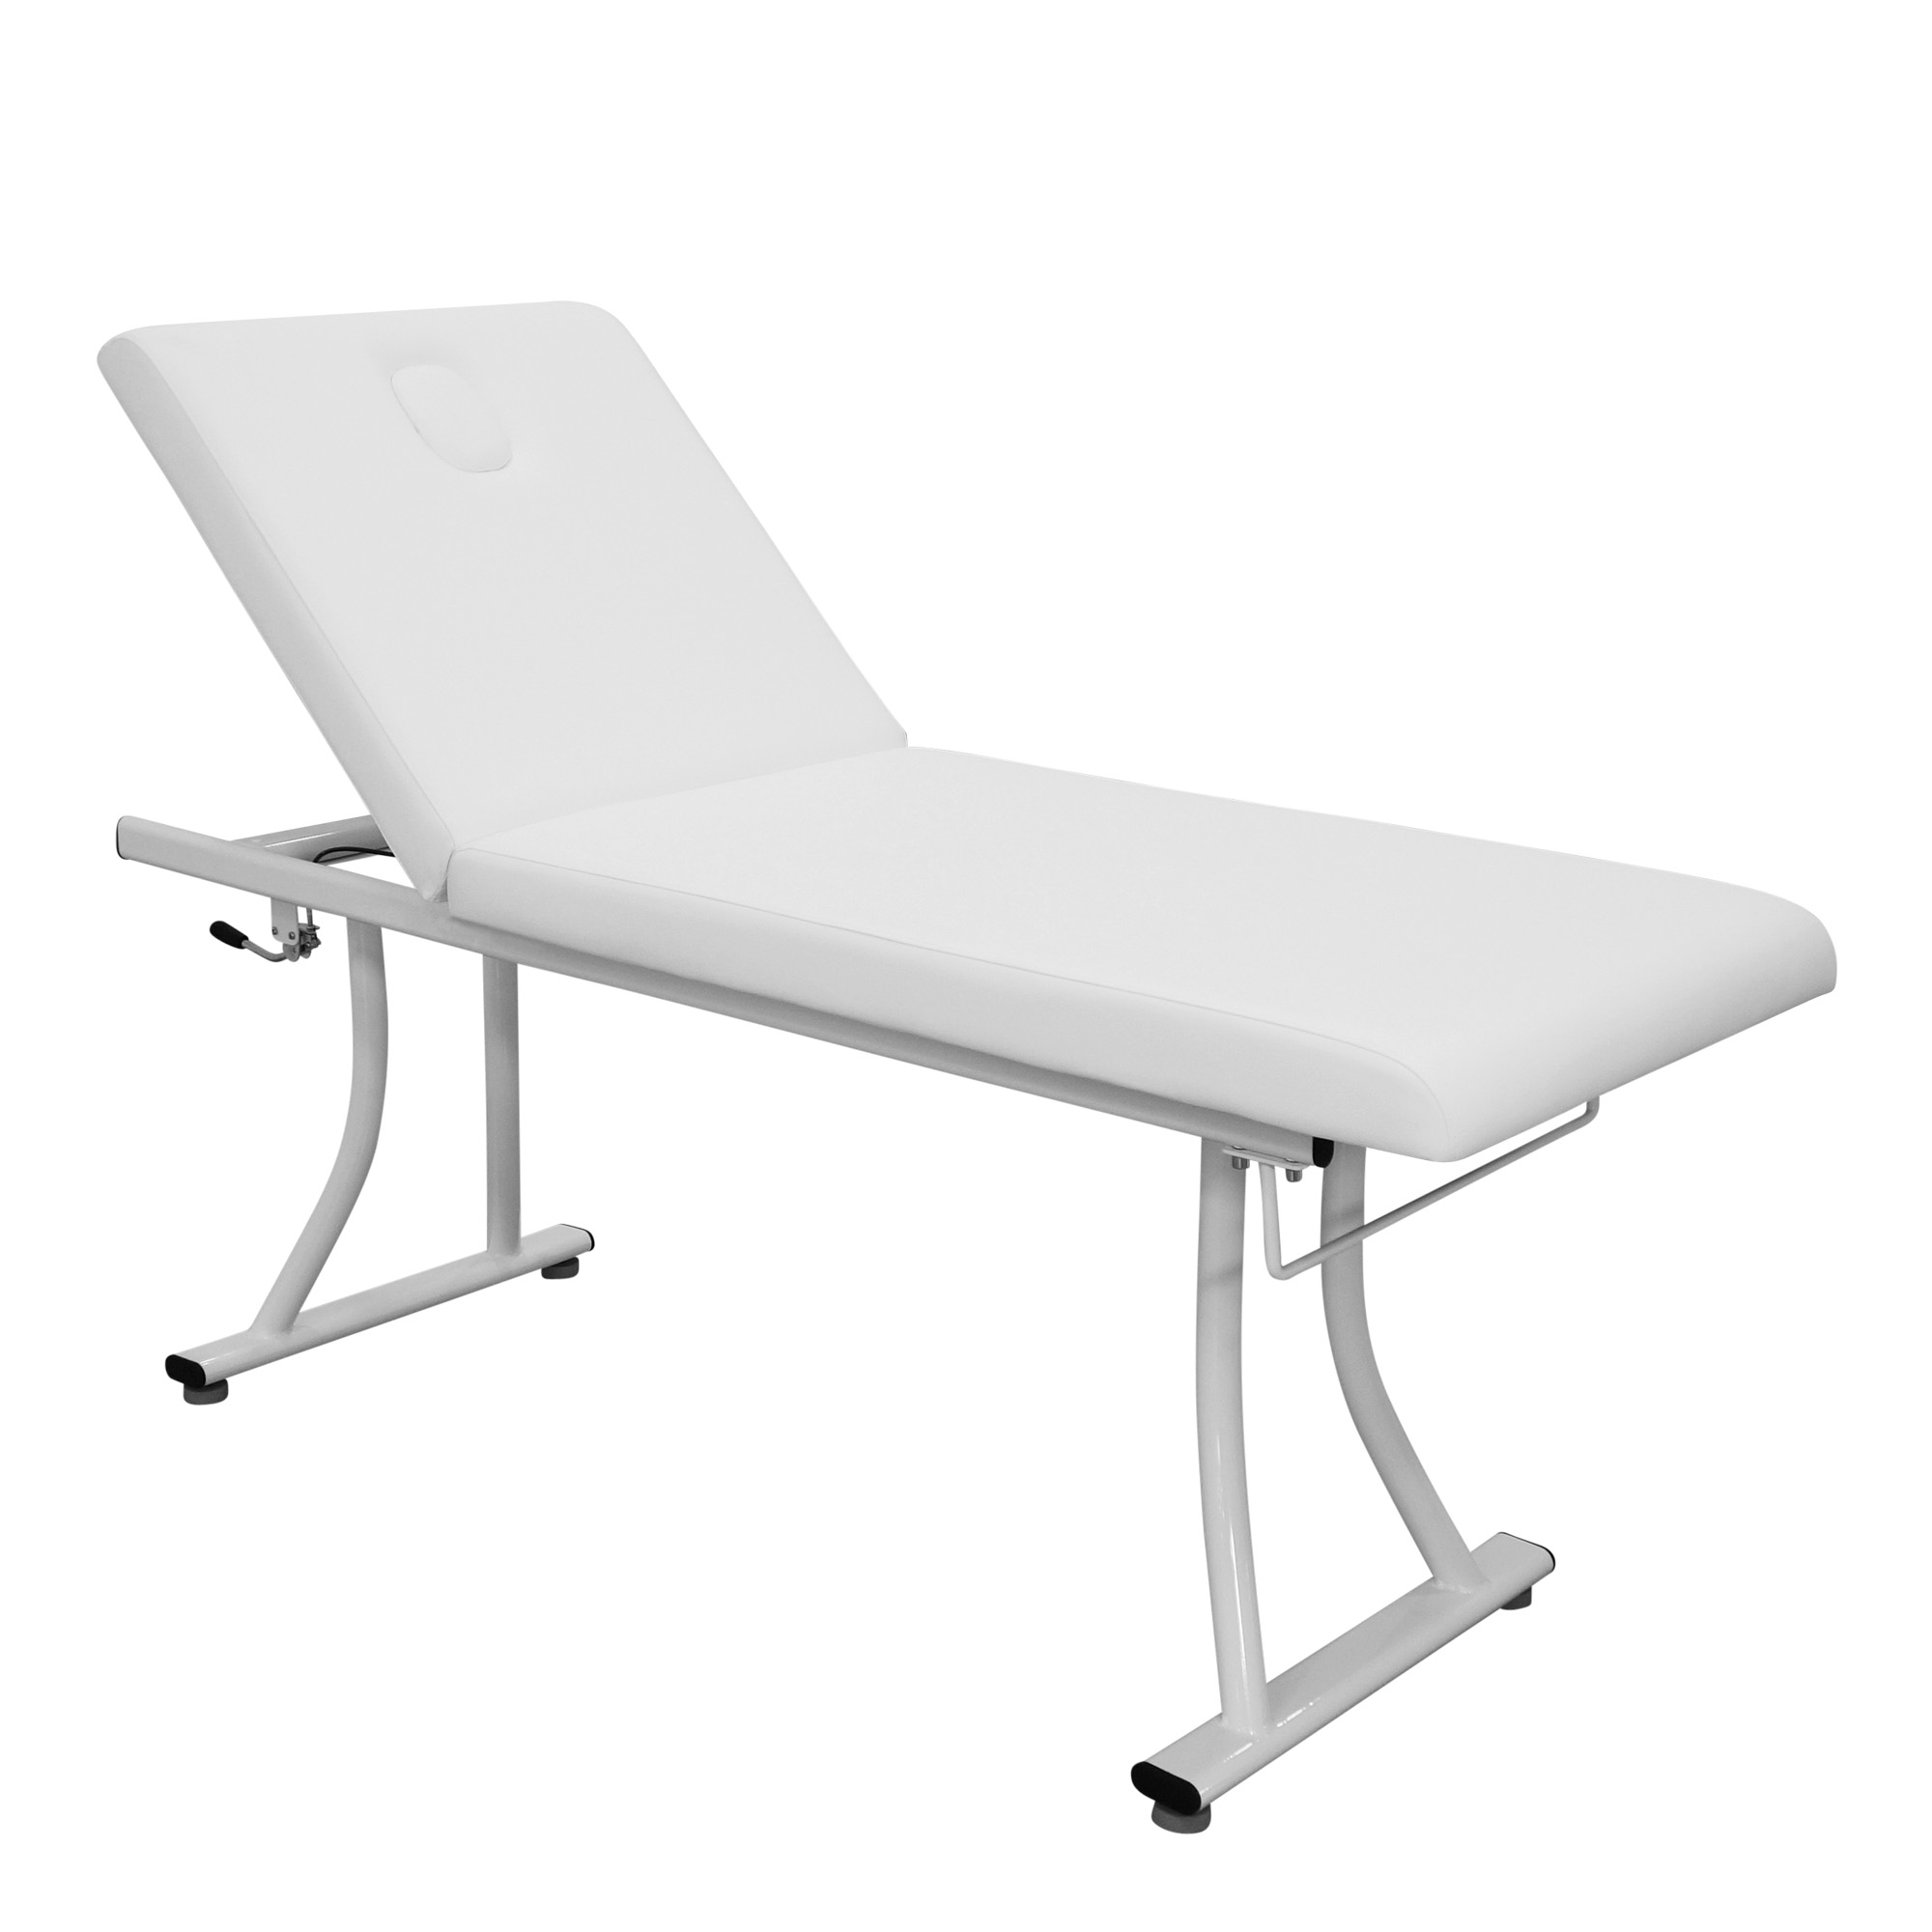 Single-joint stainless steel massage bed with face hole and paper-roll holder